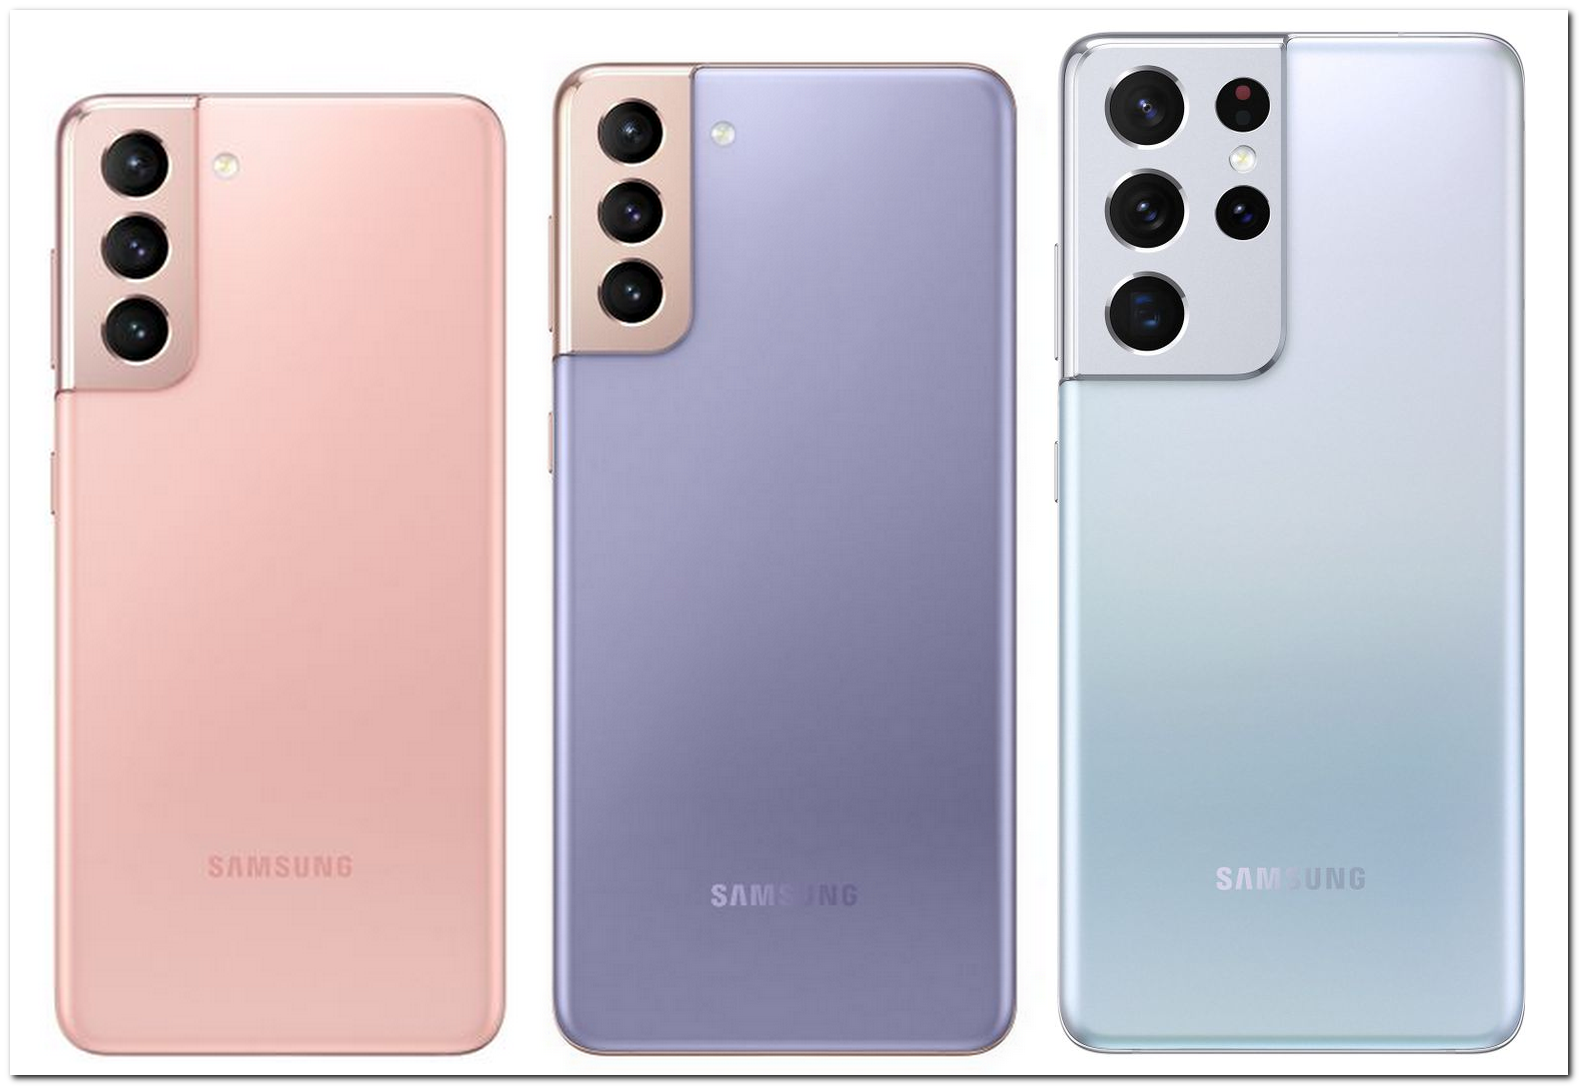 Galaxy S21 series in 3 different colors